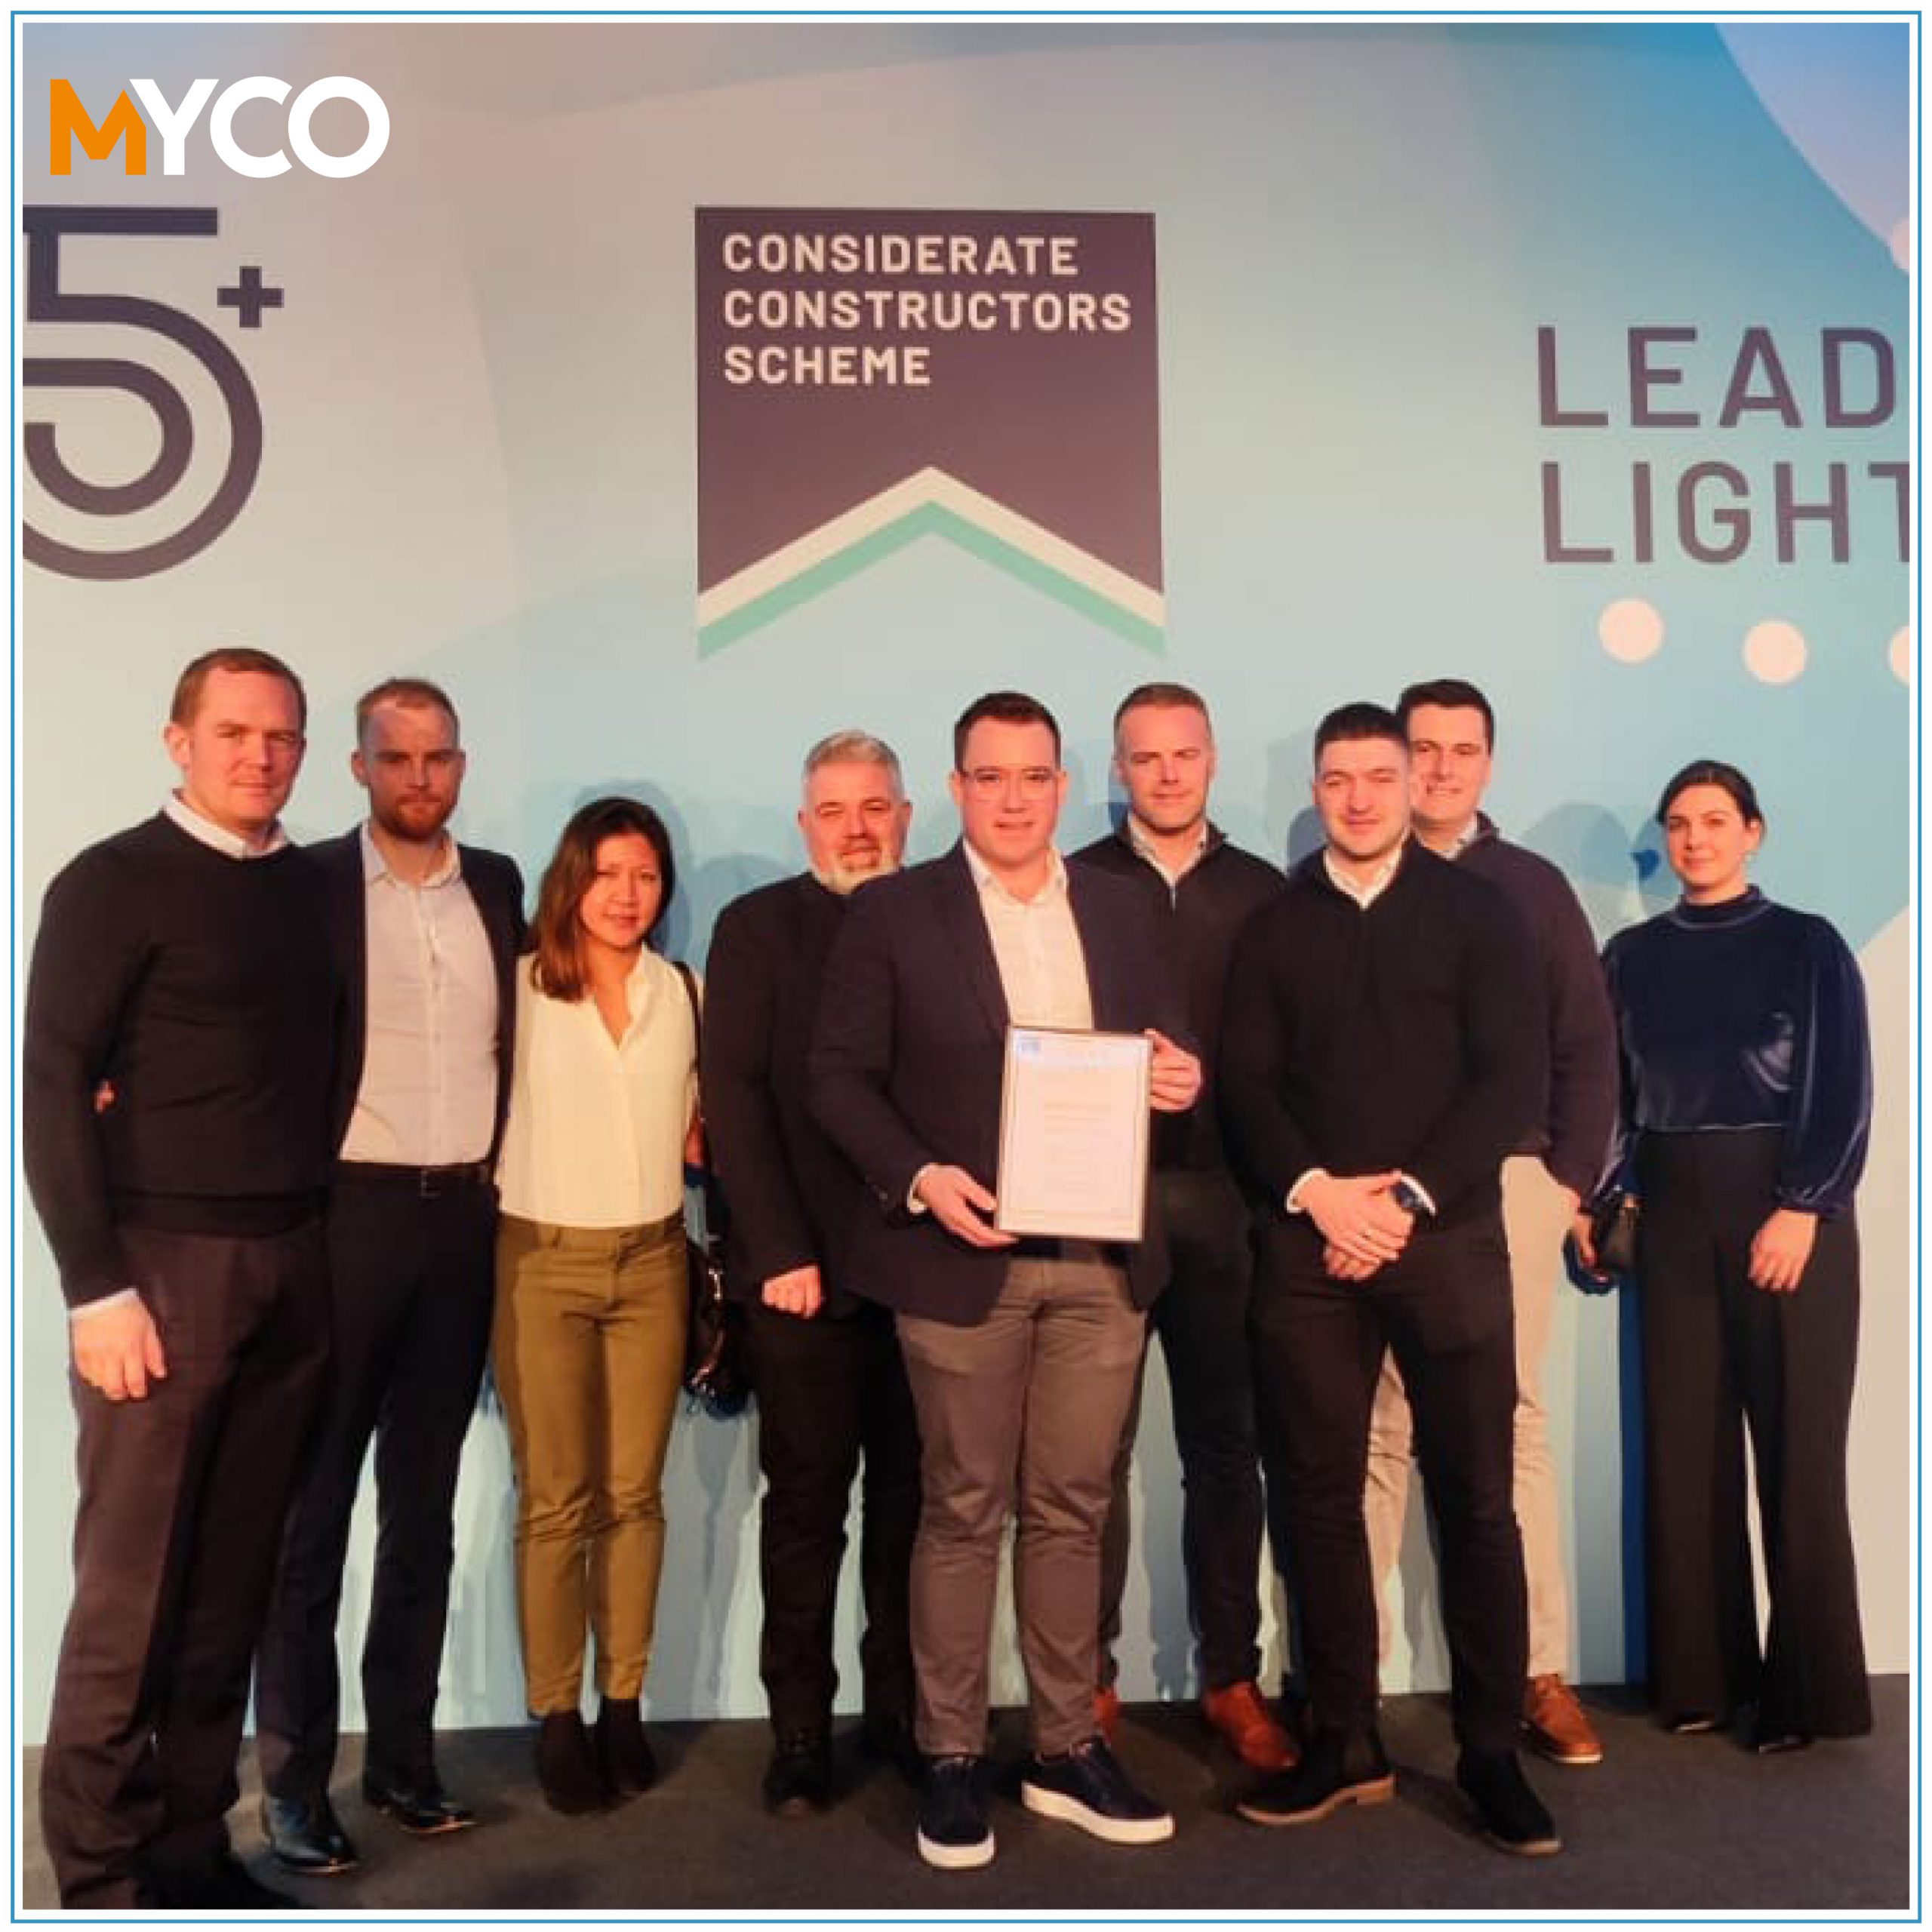 MYCO wins Considerate Constructors Leading Light Award for Wellbeing Programme